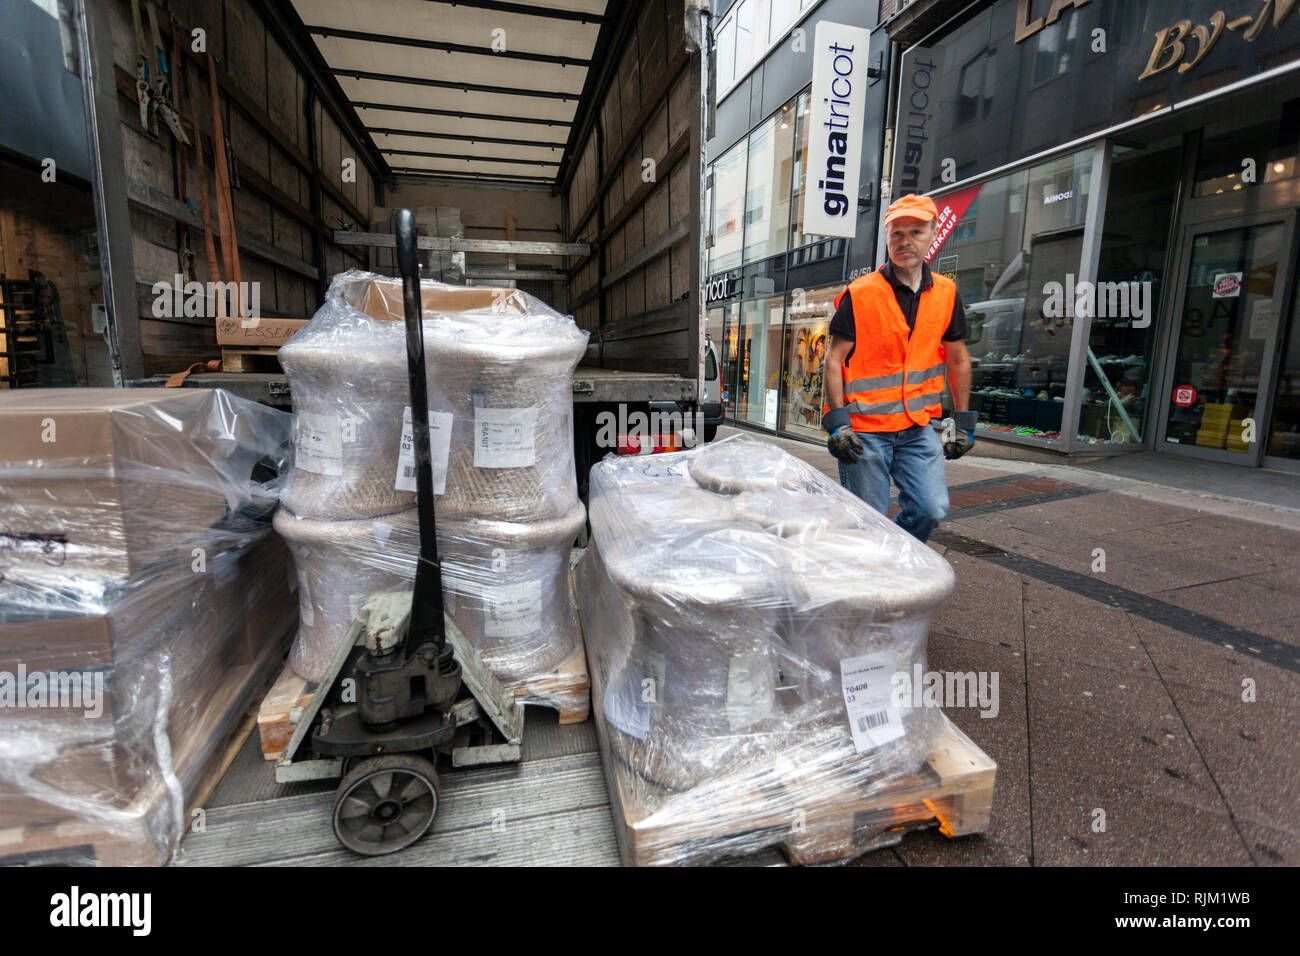 Spedition delivers bulky goods in the pedestrian zone Stock Photo